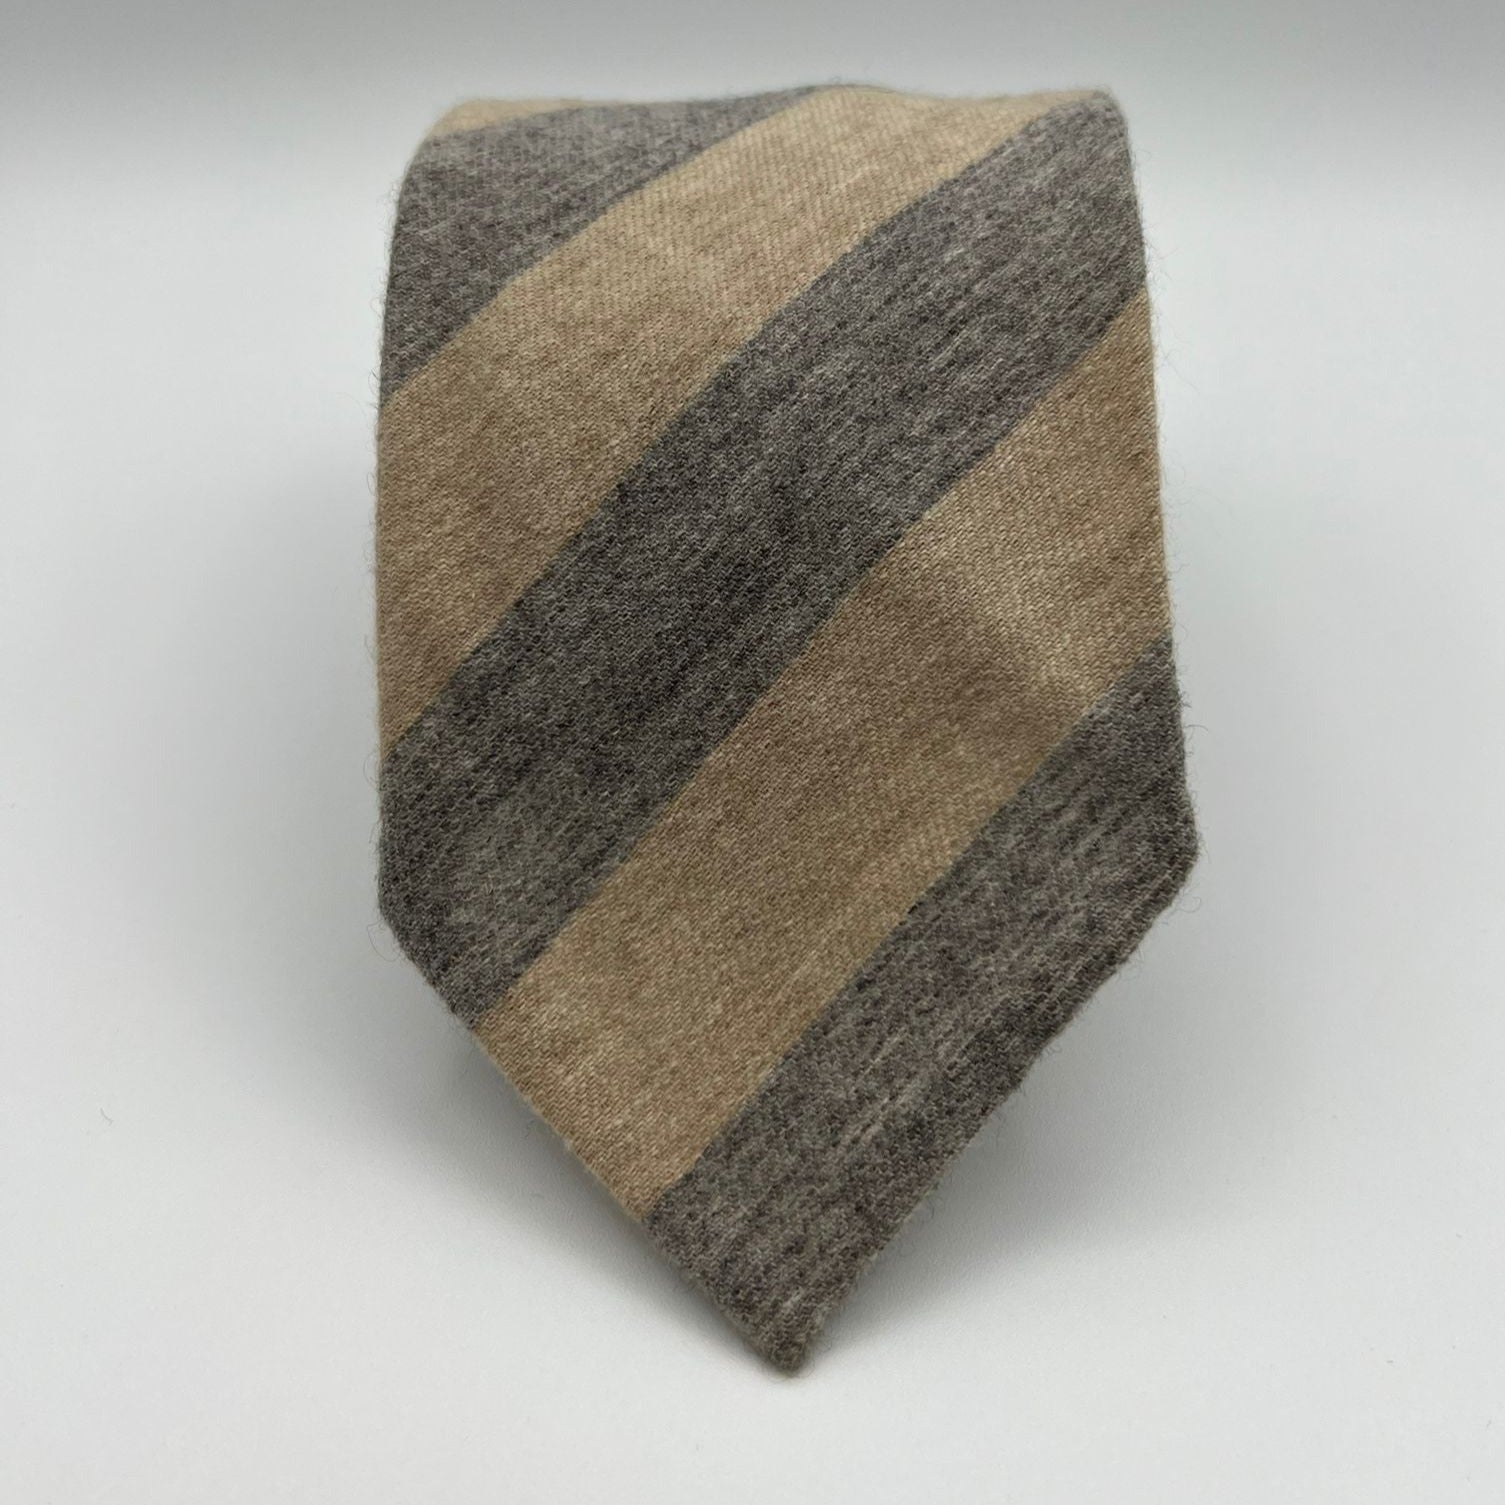 Our Old Label " La Cravatta & Co." 80% Wool  20% Cashmere Unlined Beige Tie Beige and Light Grey Stripes Handmade in Italy 9 cm x 149 cm New Old Stock #7086